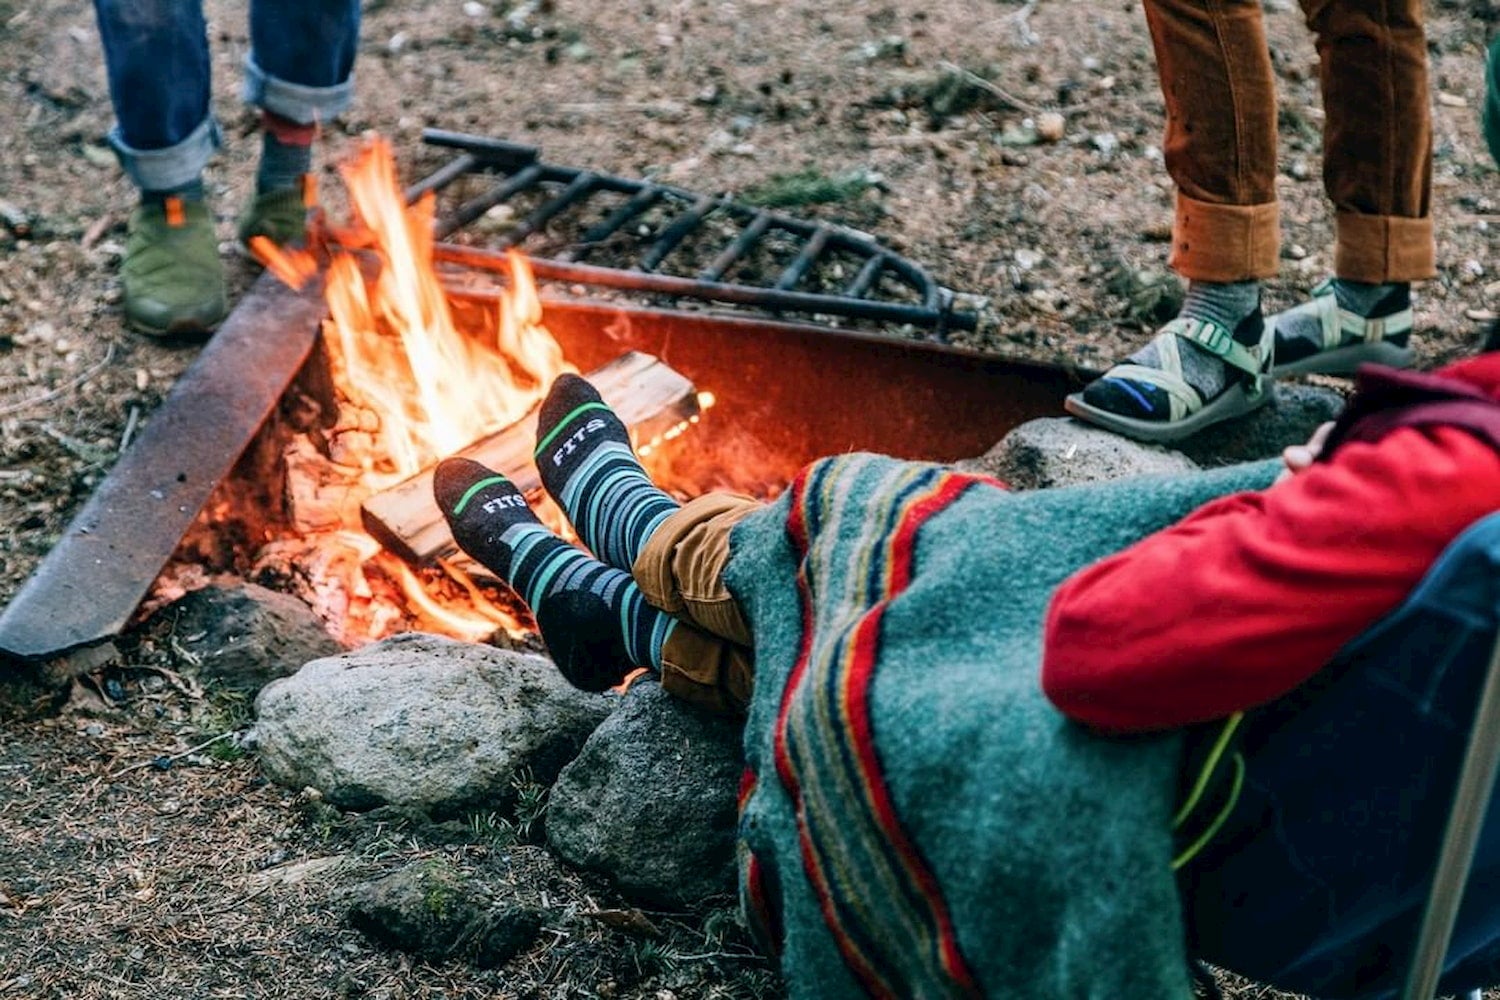 2020 Fall Gear Guide: Our favorite Items for Camping This Season